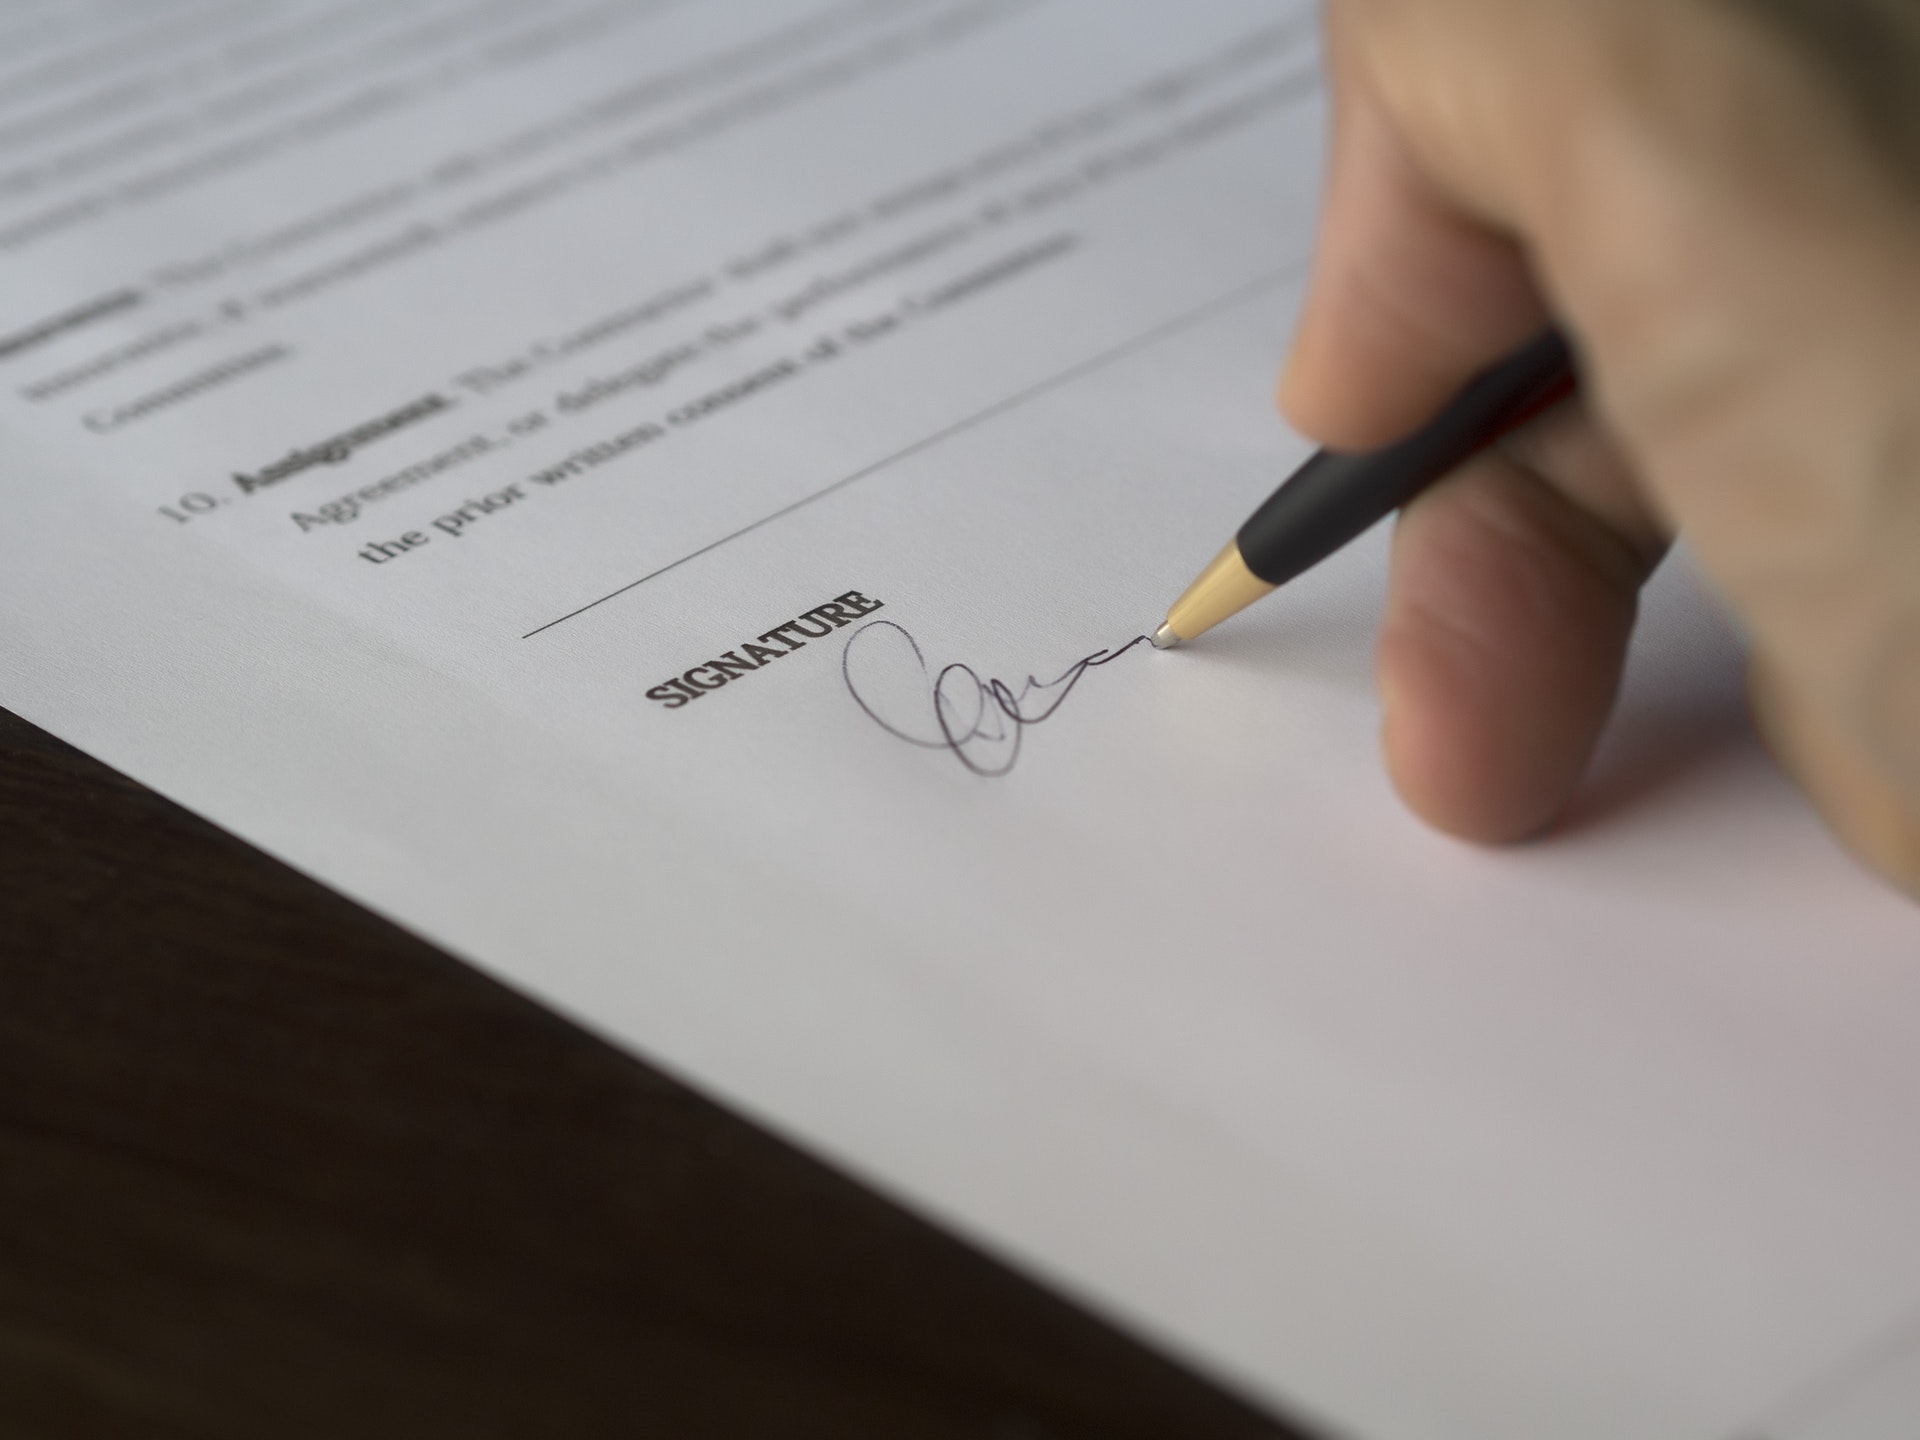 Signing car insurance agreement for added broker coverage